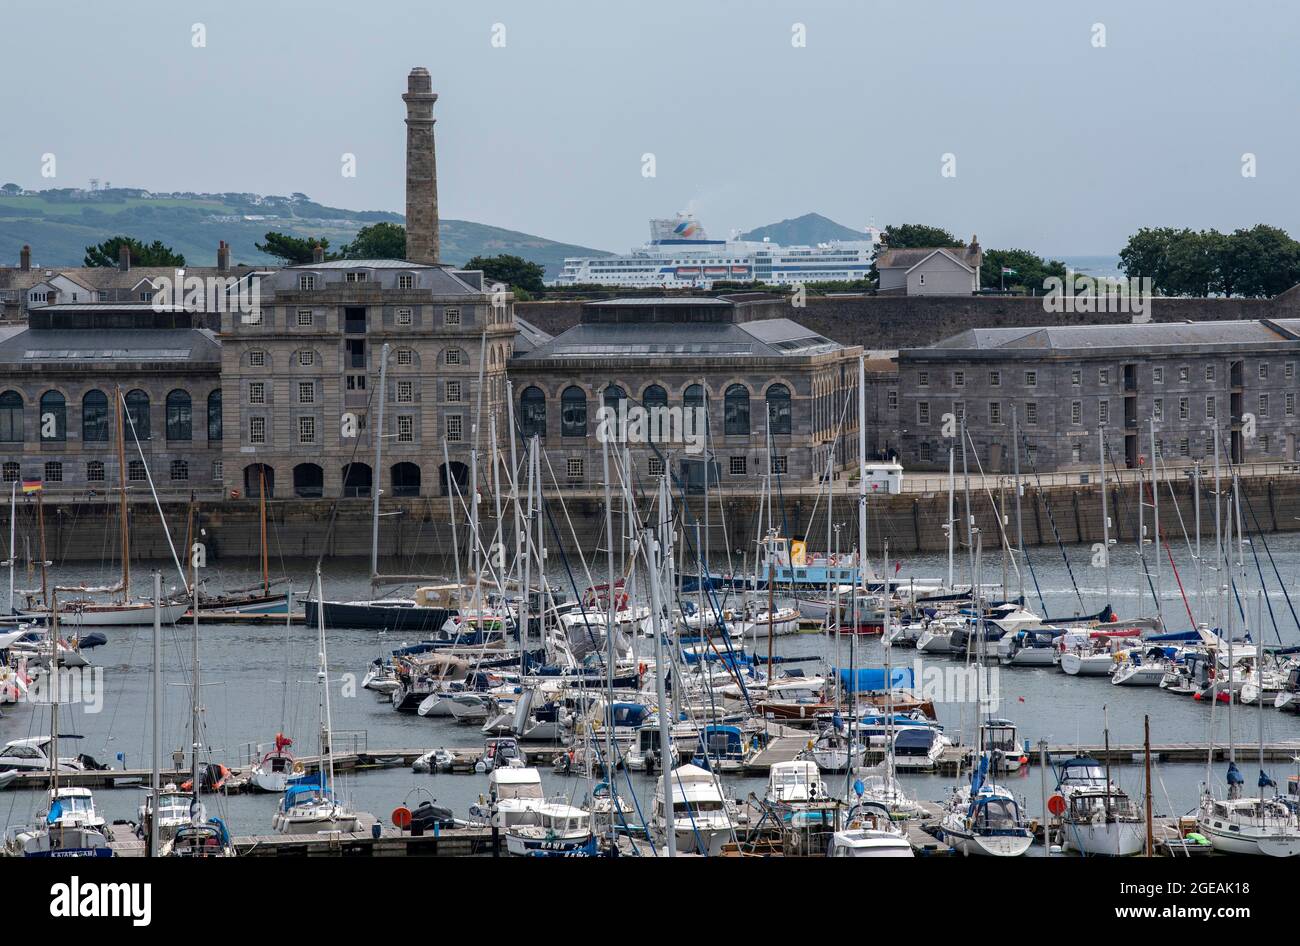 Plymouth, Devon, England, UK. 2021. The Royal William Yard a Grade 1 listed site formerly Royal Navy victualling bulidings seen from Mount Wise park, Stock Photo